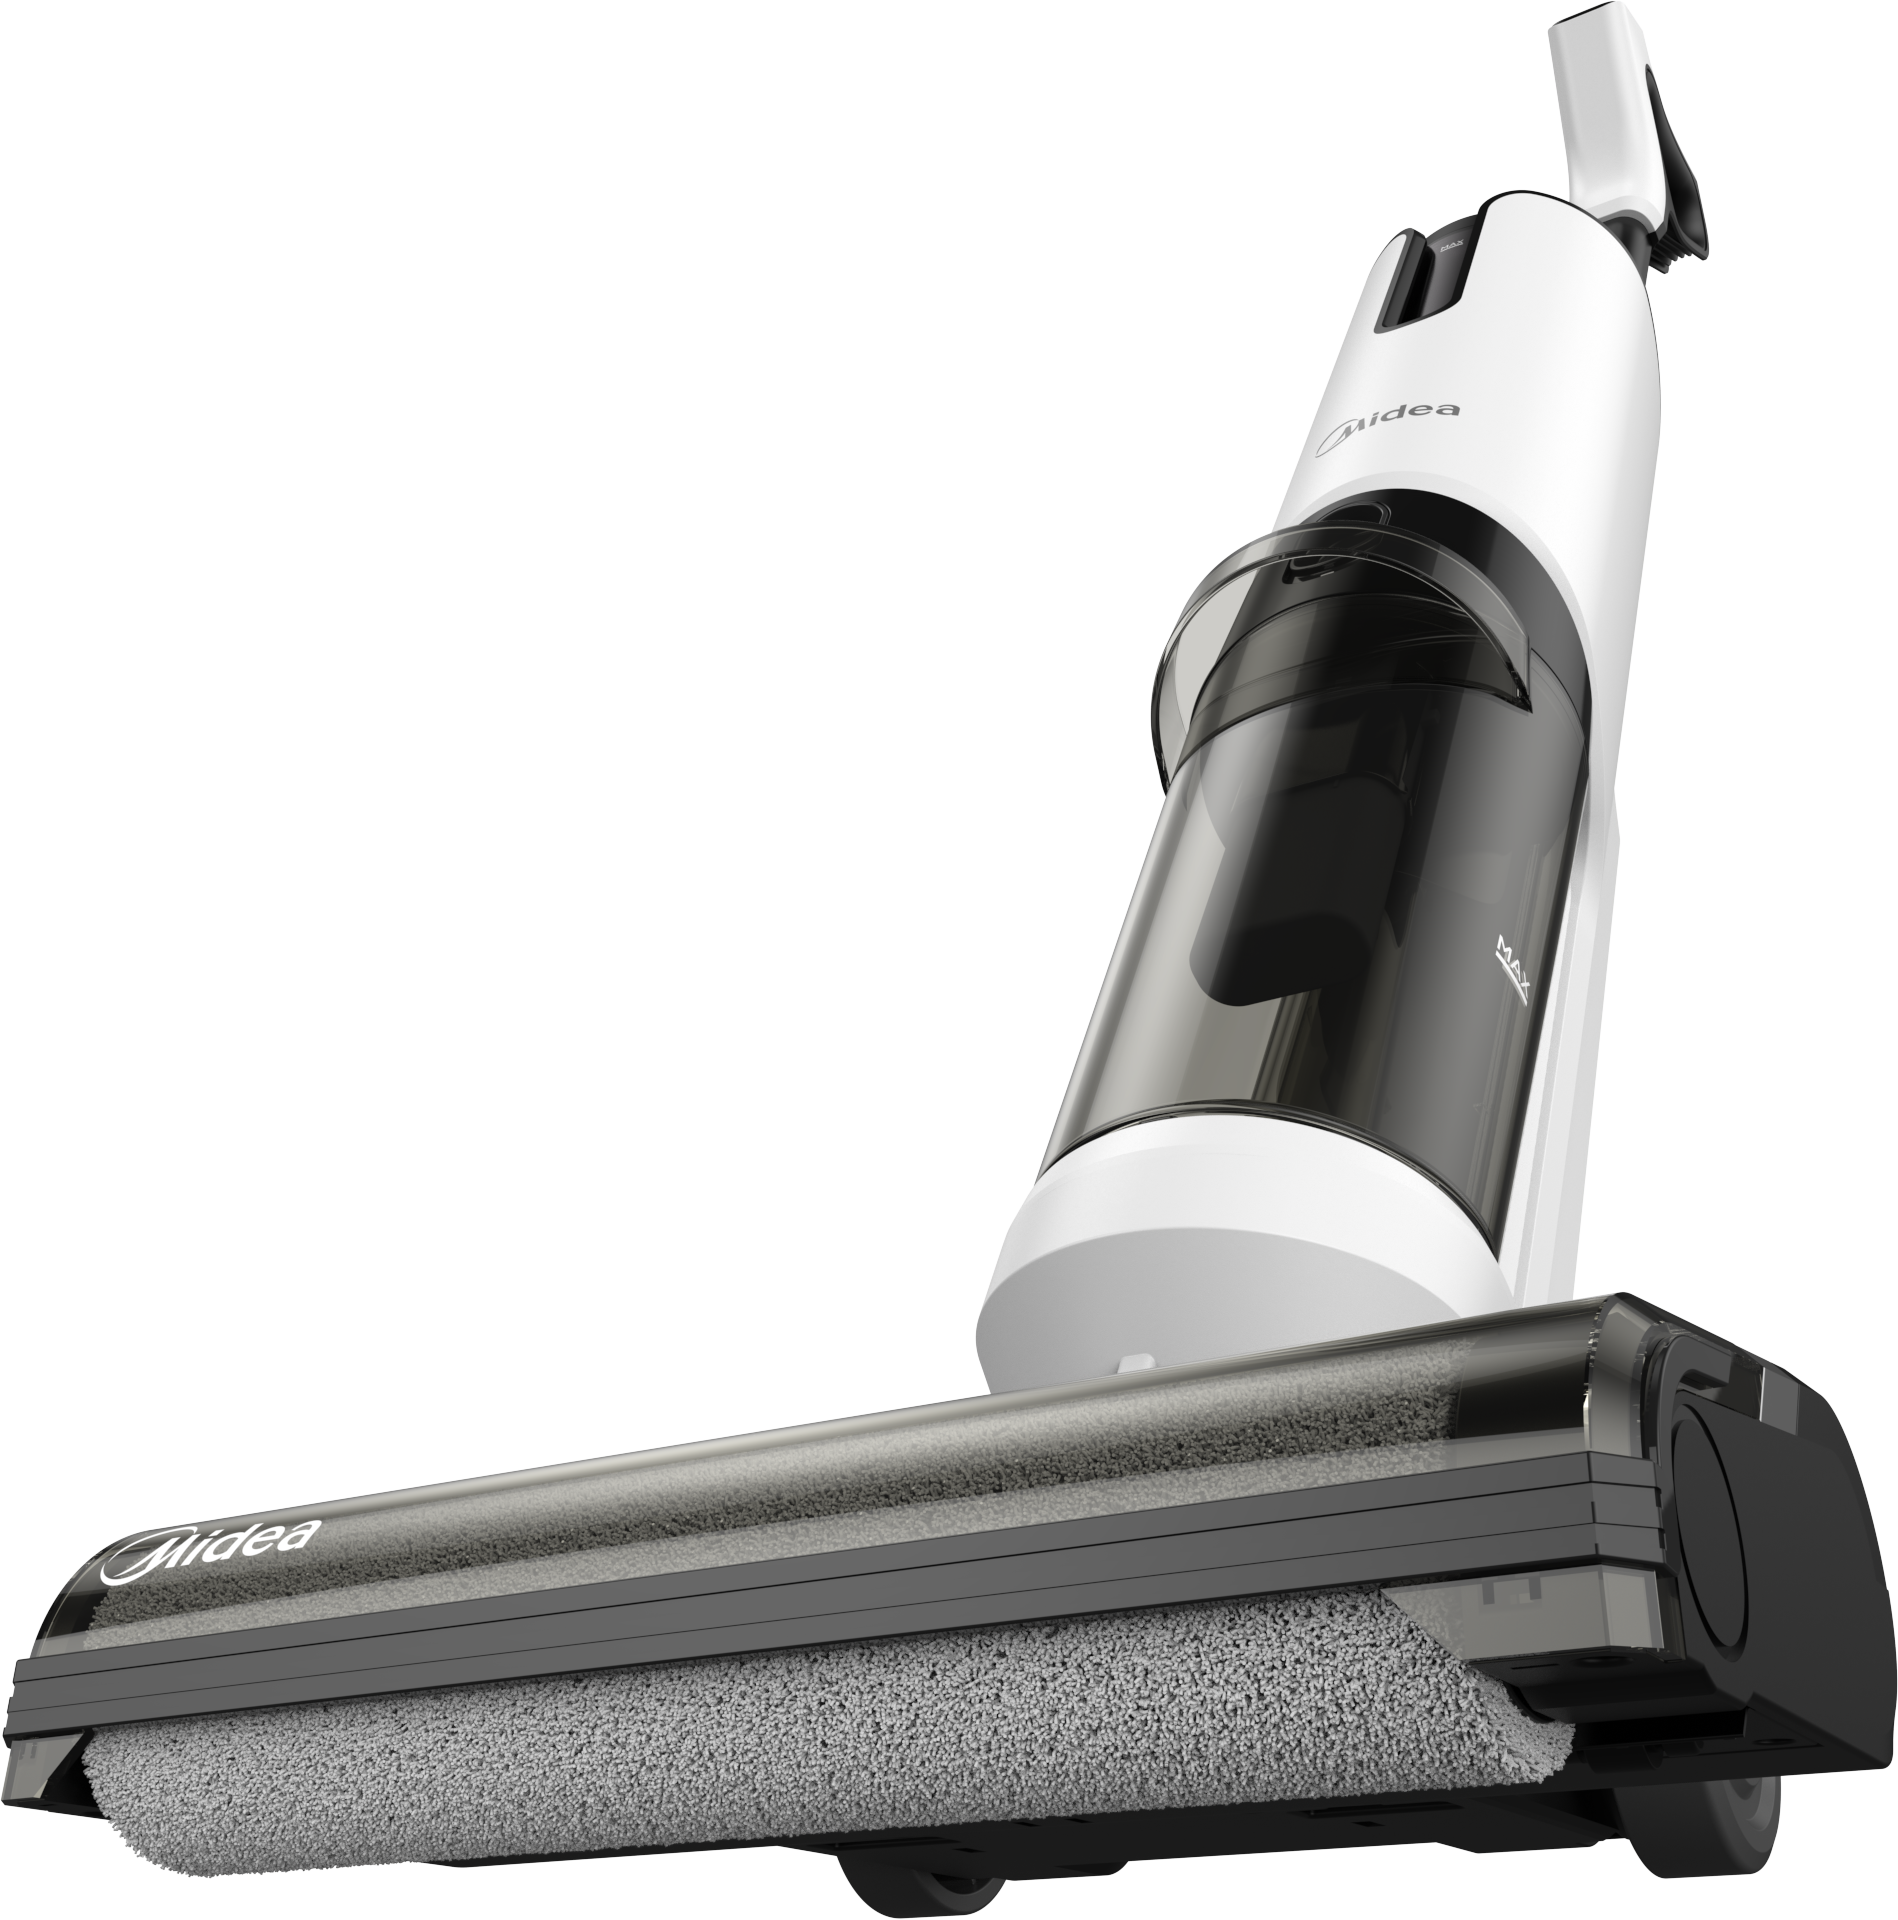 Wet & Dry Cordless Vacuum Cleaner With Self-Cleaning Function